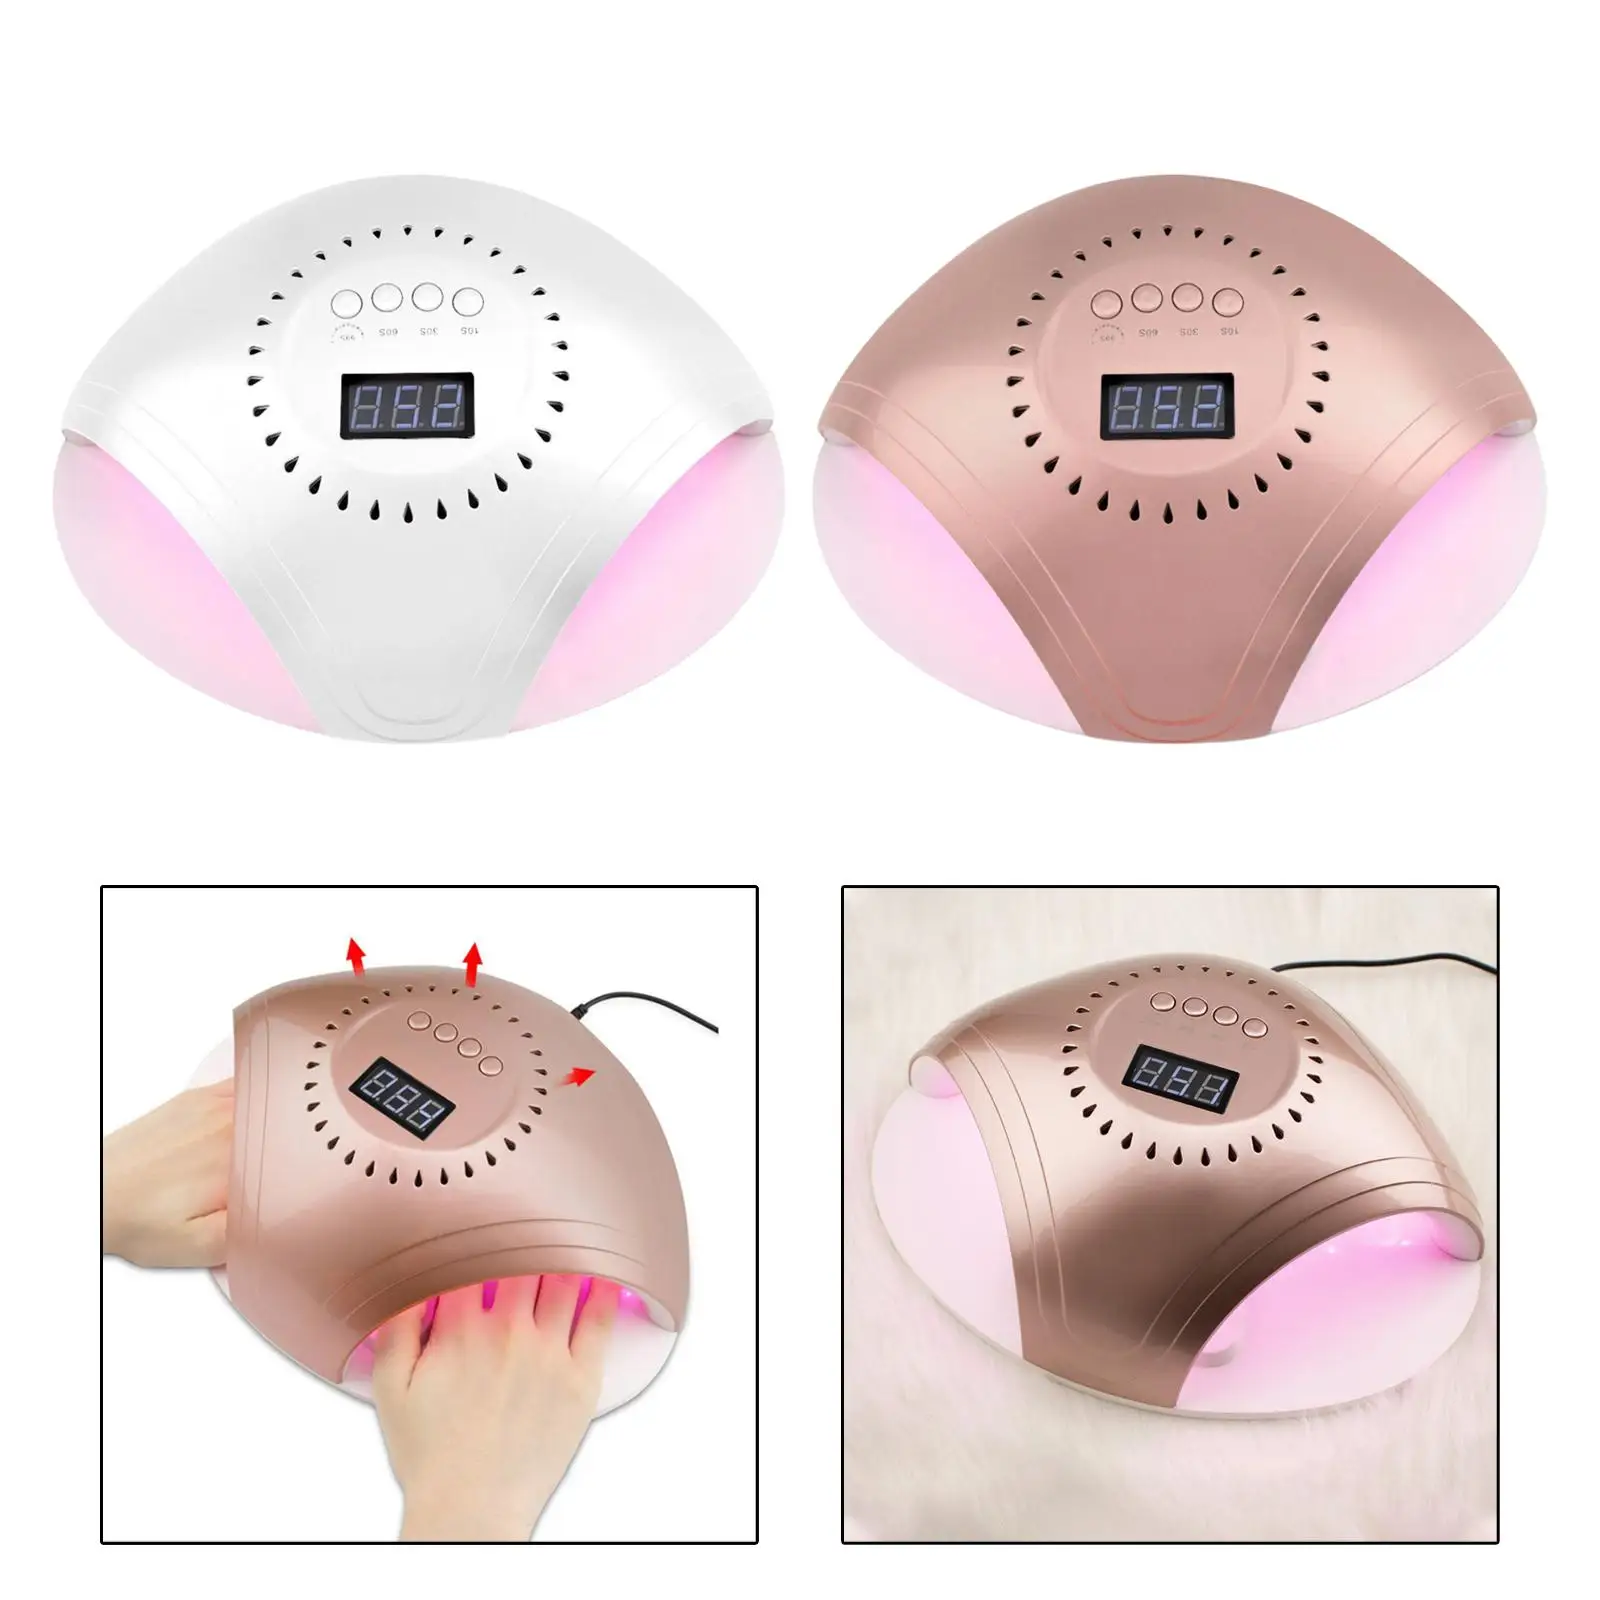 UV LED Nail Lamp 86W with 43 Lamp Beads Larger Space Gel Lamp for Office Use School Woman